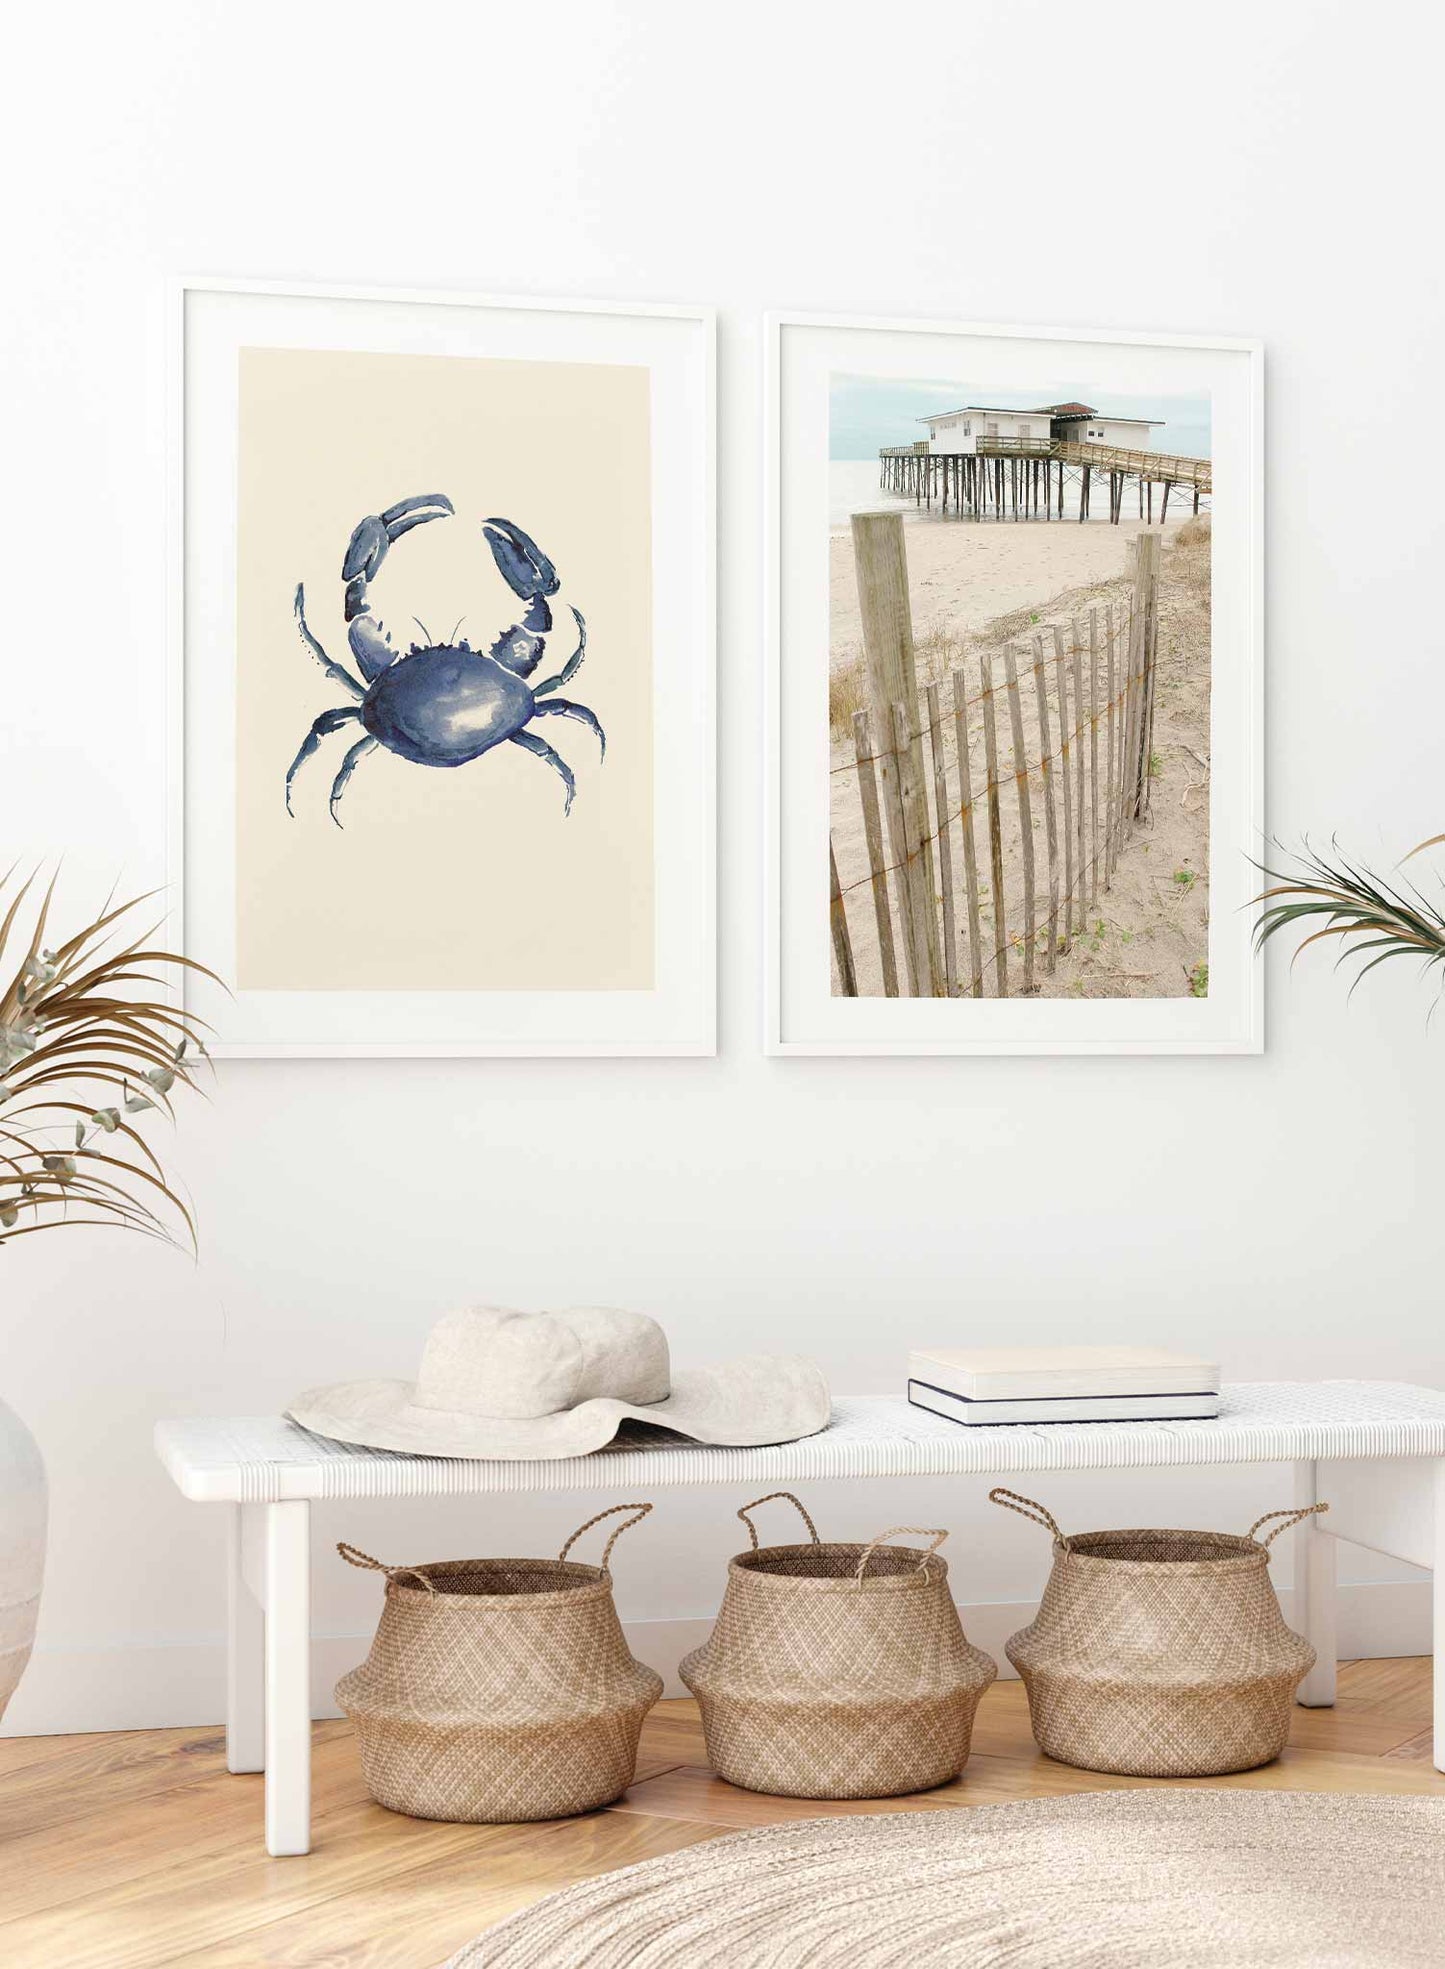 Crabby is a minimalist illustration of a grey-shelled crab showing its mighty claws by Opposite Wall.